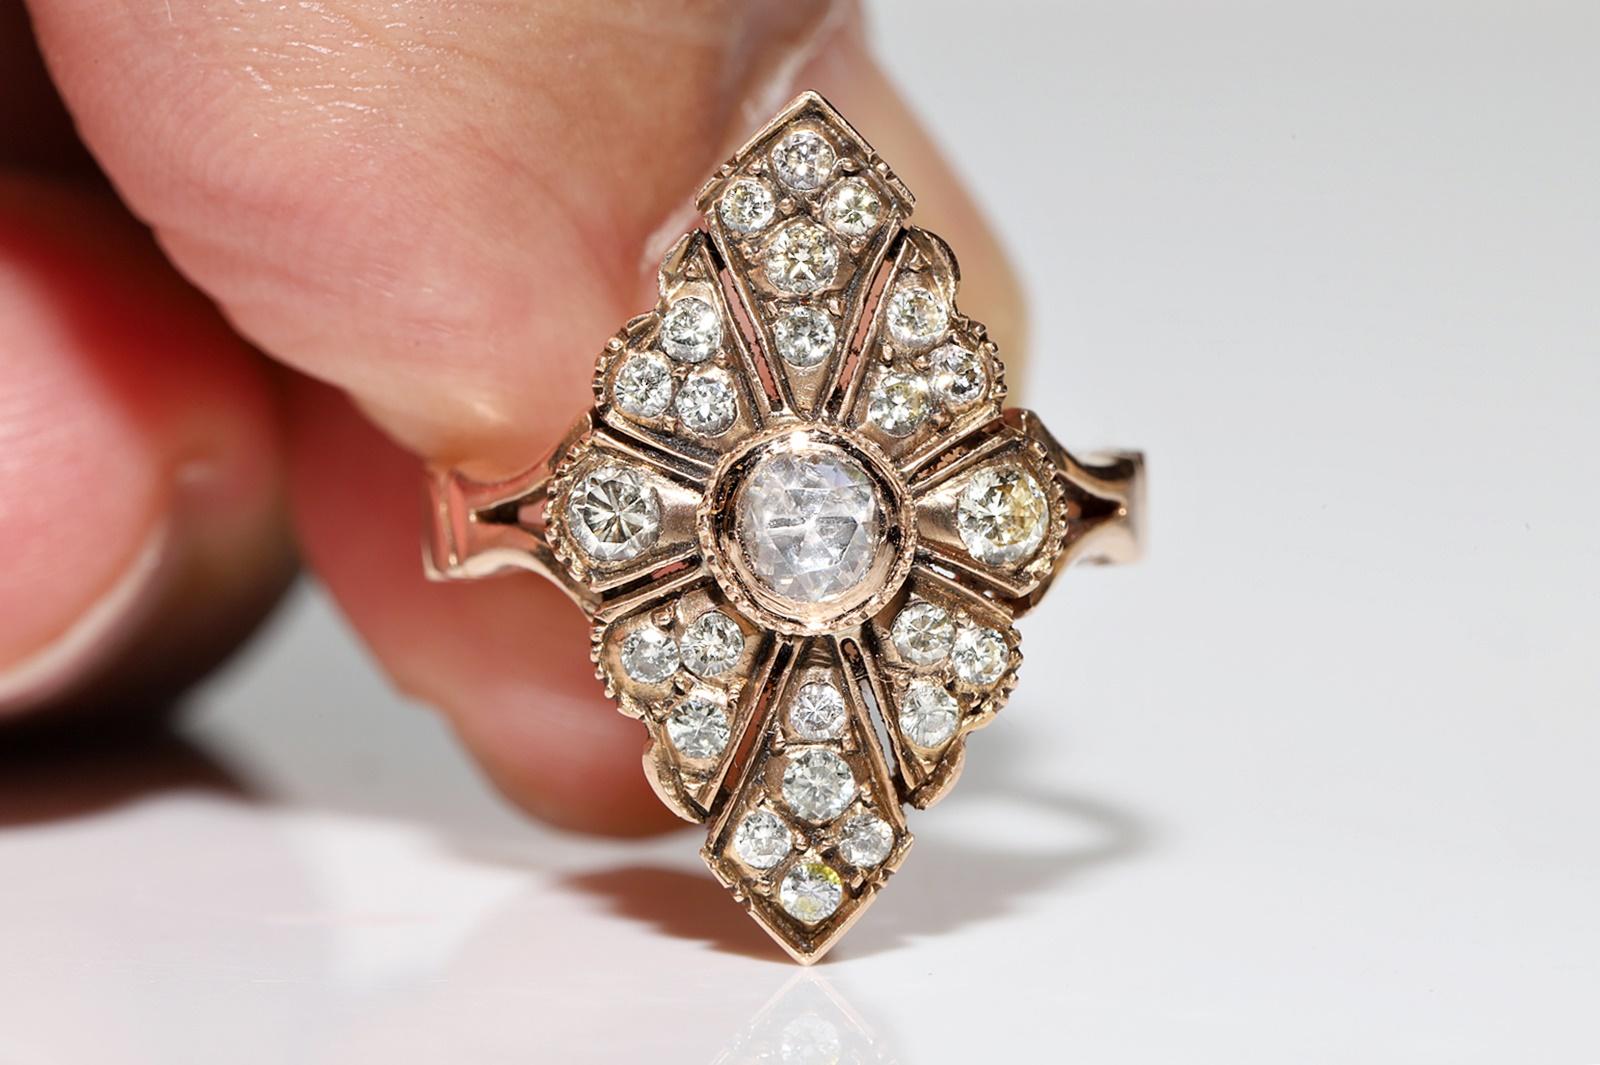 In very good condition. About 120 years old real antique.
Total weight is 4.1 grams. 
Solid 14k gold with properly hallmarked images attached.
The main stone is 0.15 ct rose cut natural diamond.
There are 24 brillant cut natural diamonds around the